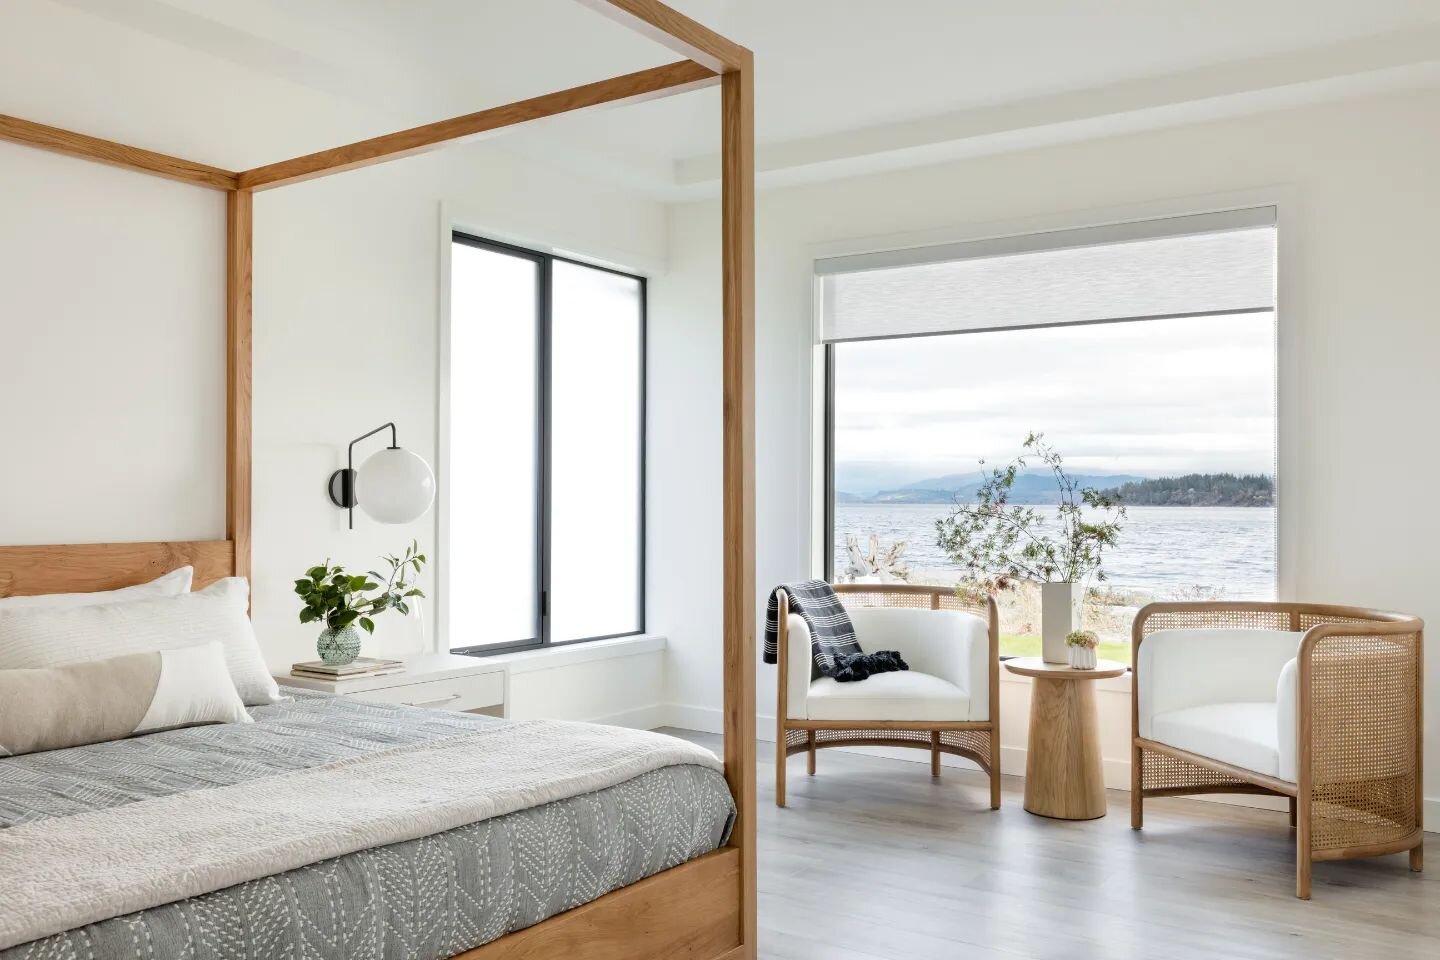 Our #camanobeachhouse client had always wanted a four poster bed, and this expansive bedroom provided plenty of space to make that dream a reality. A pair of #leanneford rattan chairs provide a perfect spot to curl up and take in the view.

Featured 